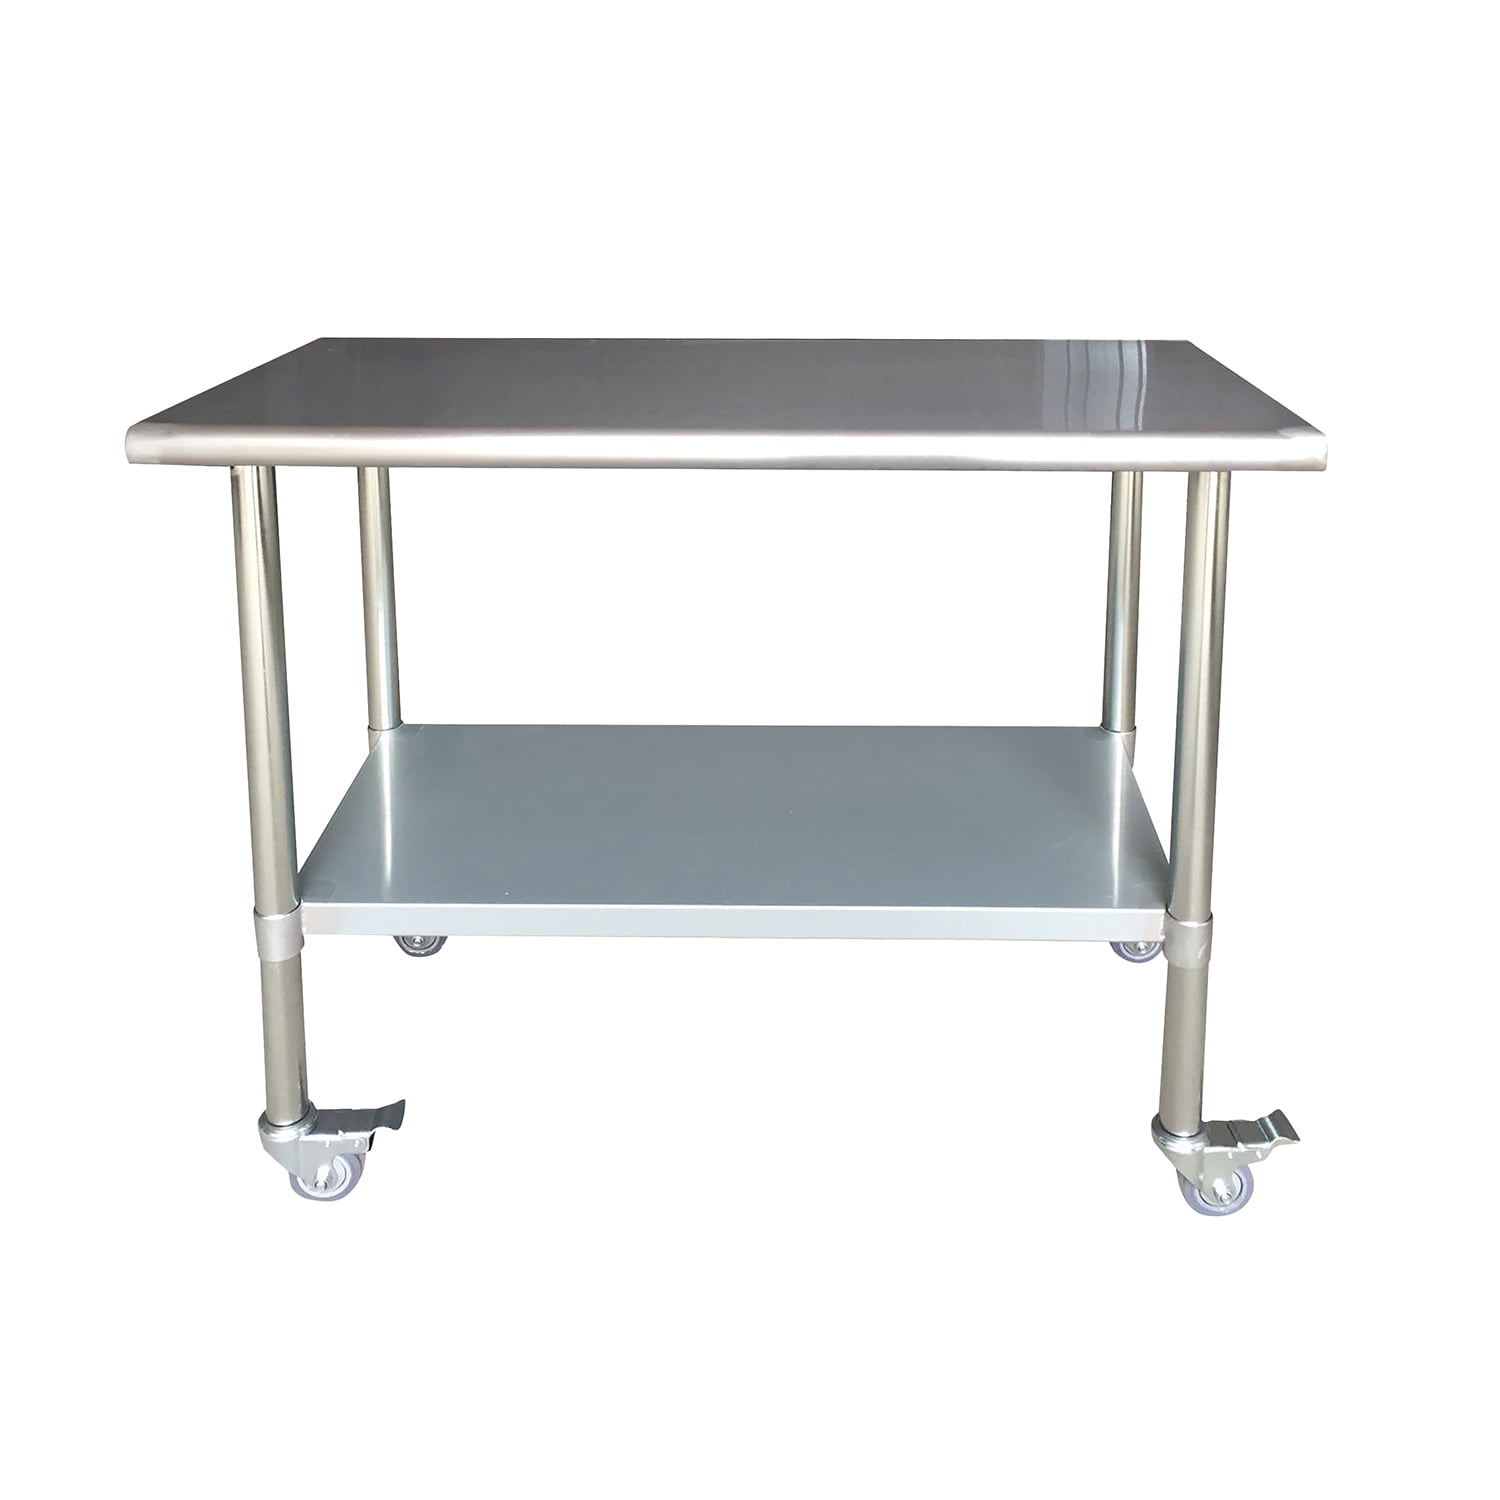 Picture of Sportsman Series SSWTWC48 24 x 48 in. Stainless Steel Work Table with Casters